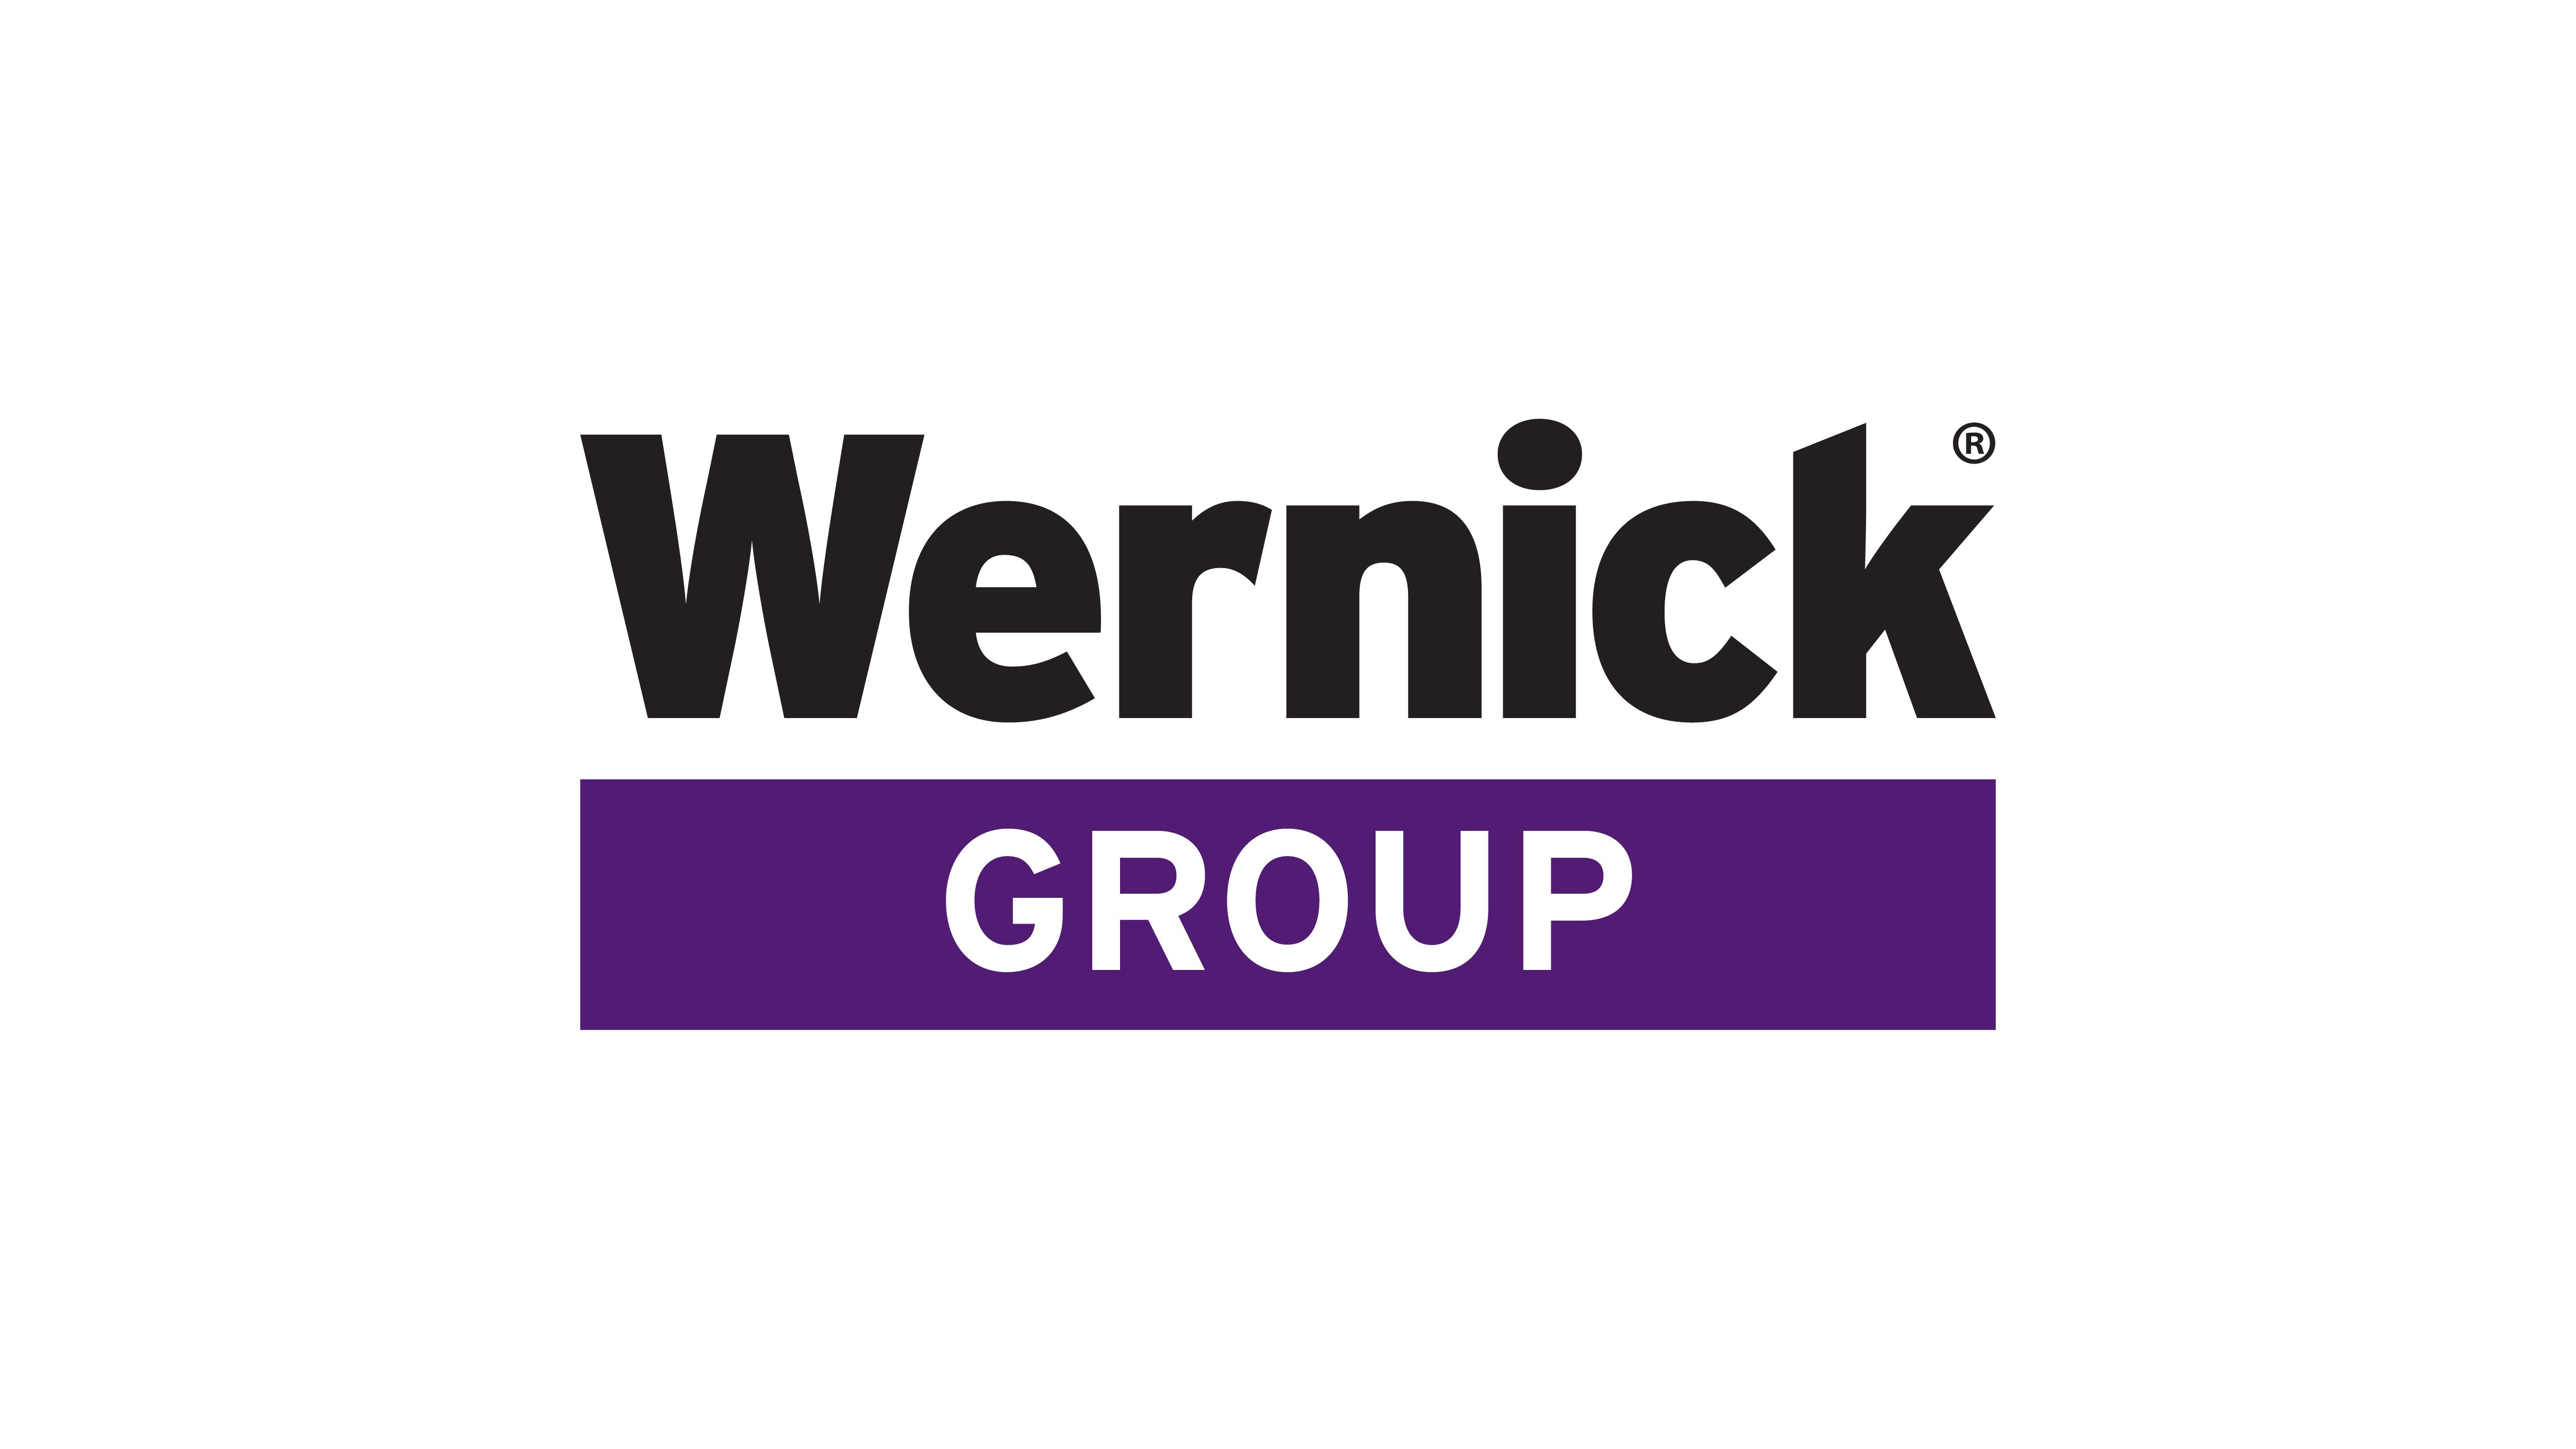 Wernick group logo on a white background.